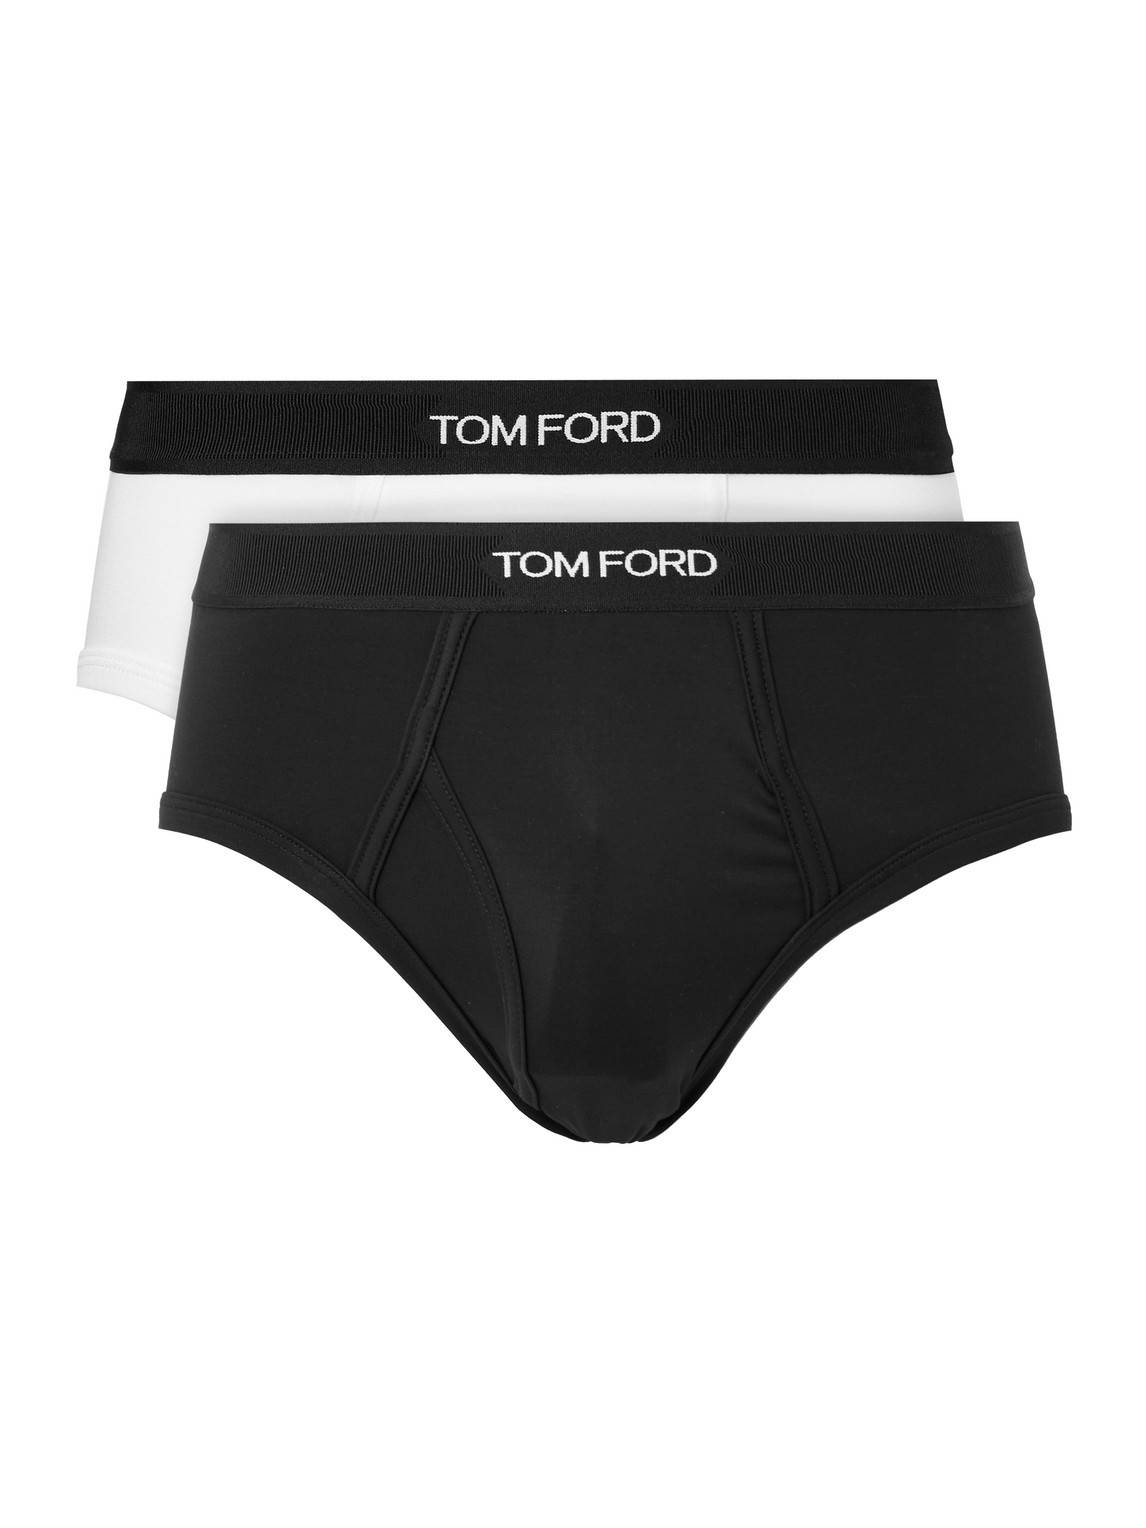 TOM FORD - Two-Pack Stretch-Cotton and Modal-Blend Briefs - Men - Multi - XXL von TOM FORD